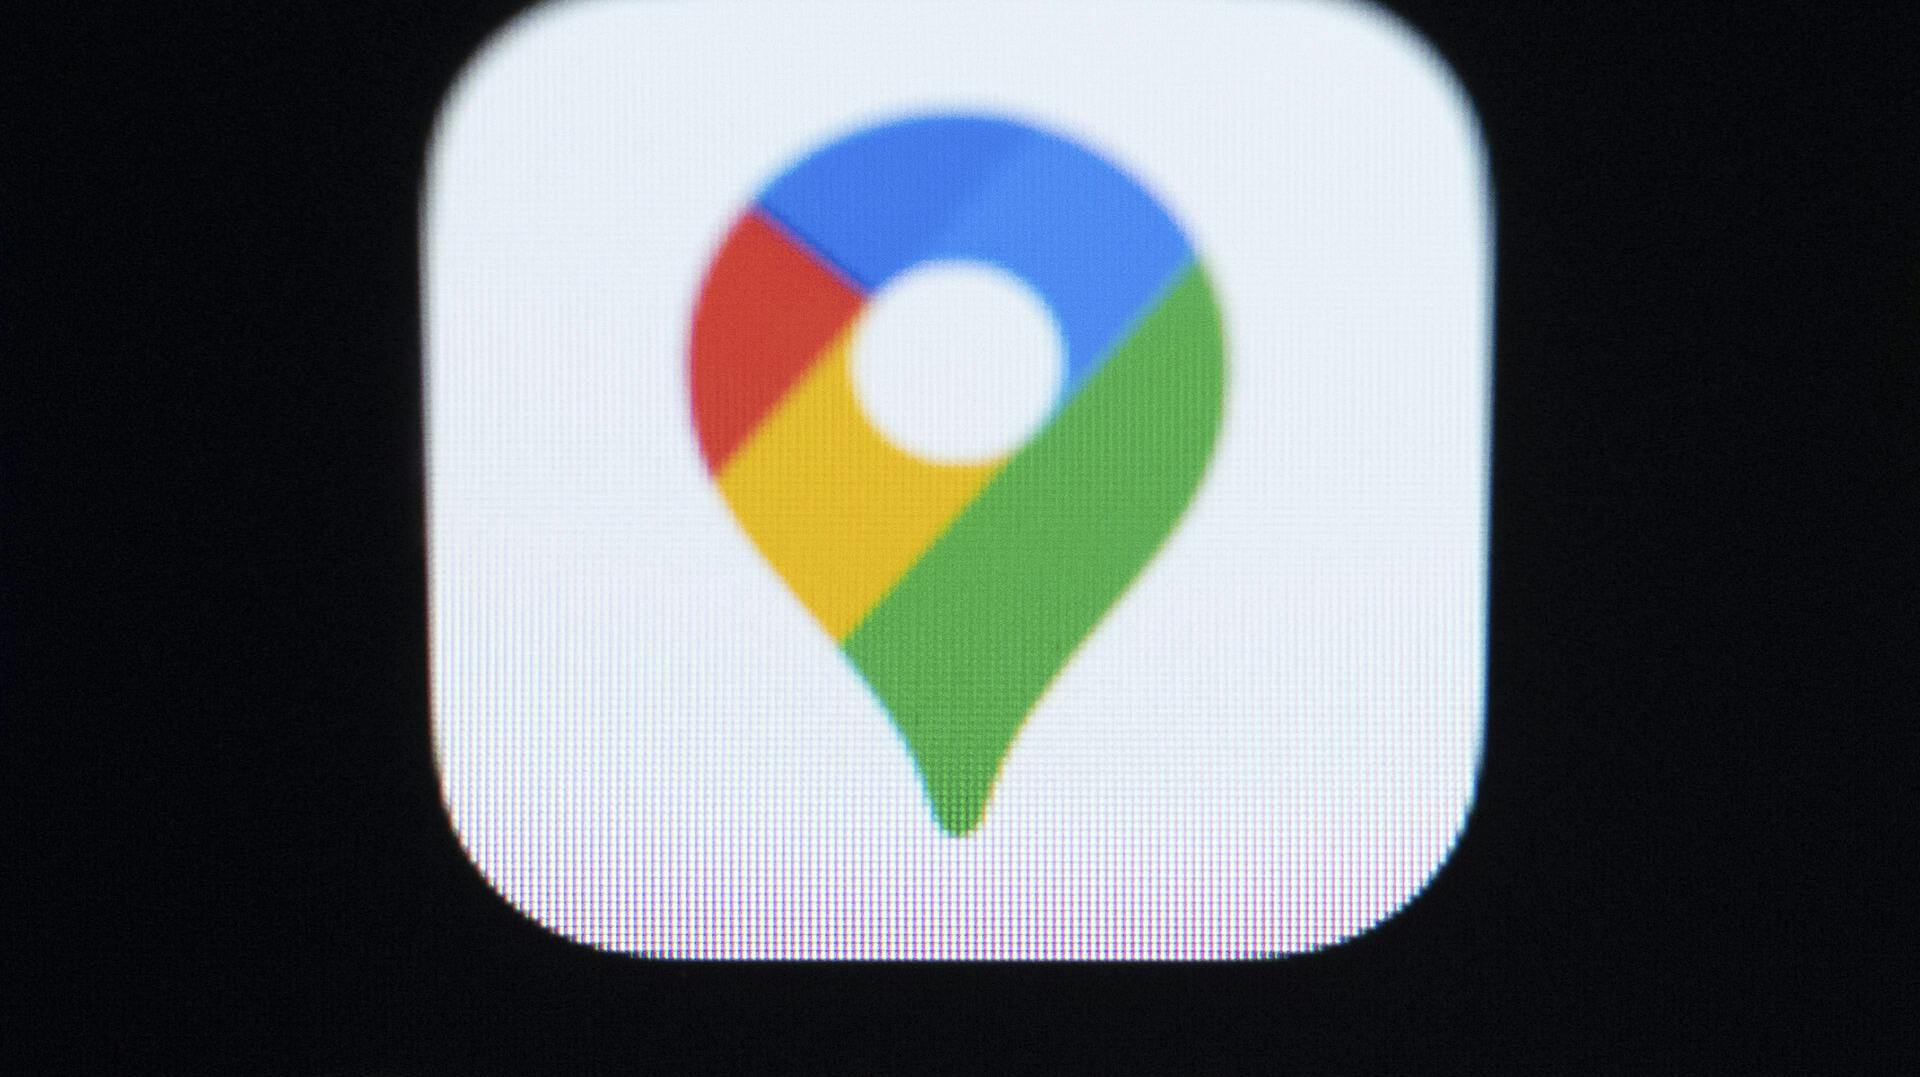 07 December 2021, Baden-Wuerttemberg, Villingen-Schwenningen: The Google Maps application app is seen on the display of an iPhone SE. Photo by: Silas Stein/picture-alliance/dpa/AP Images